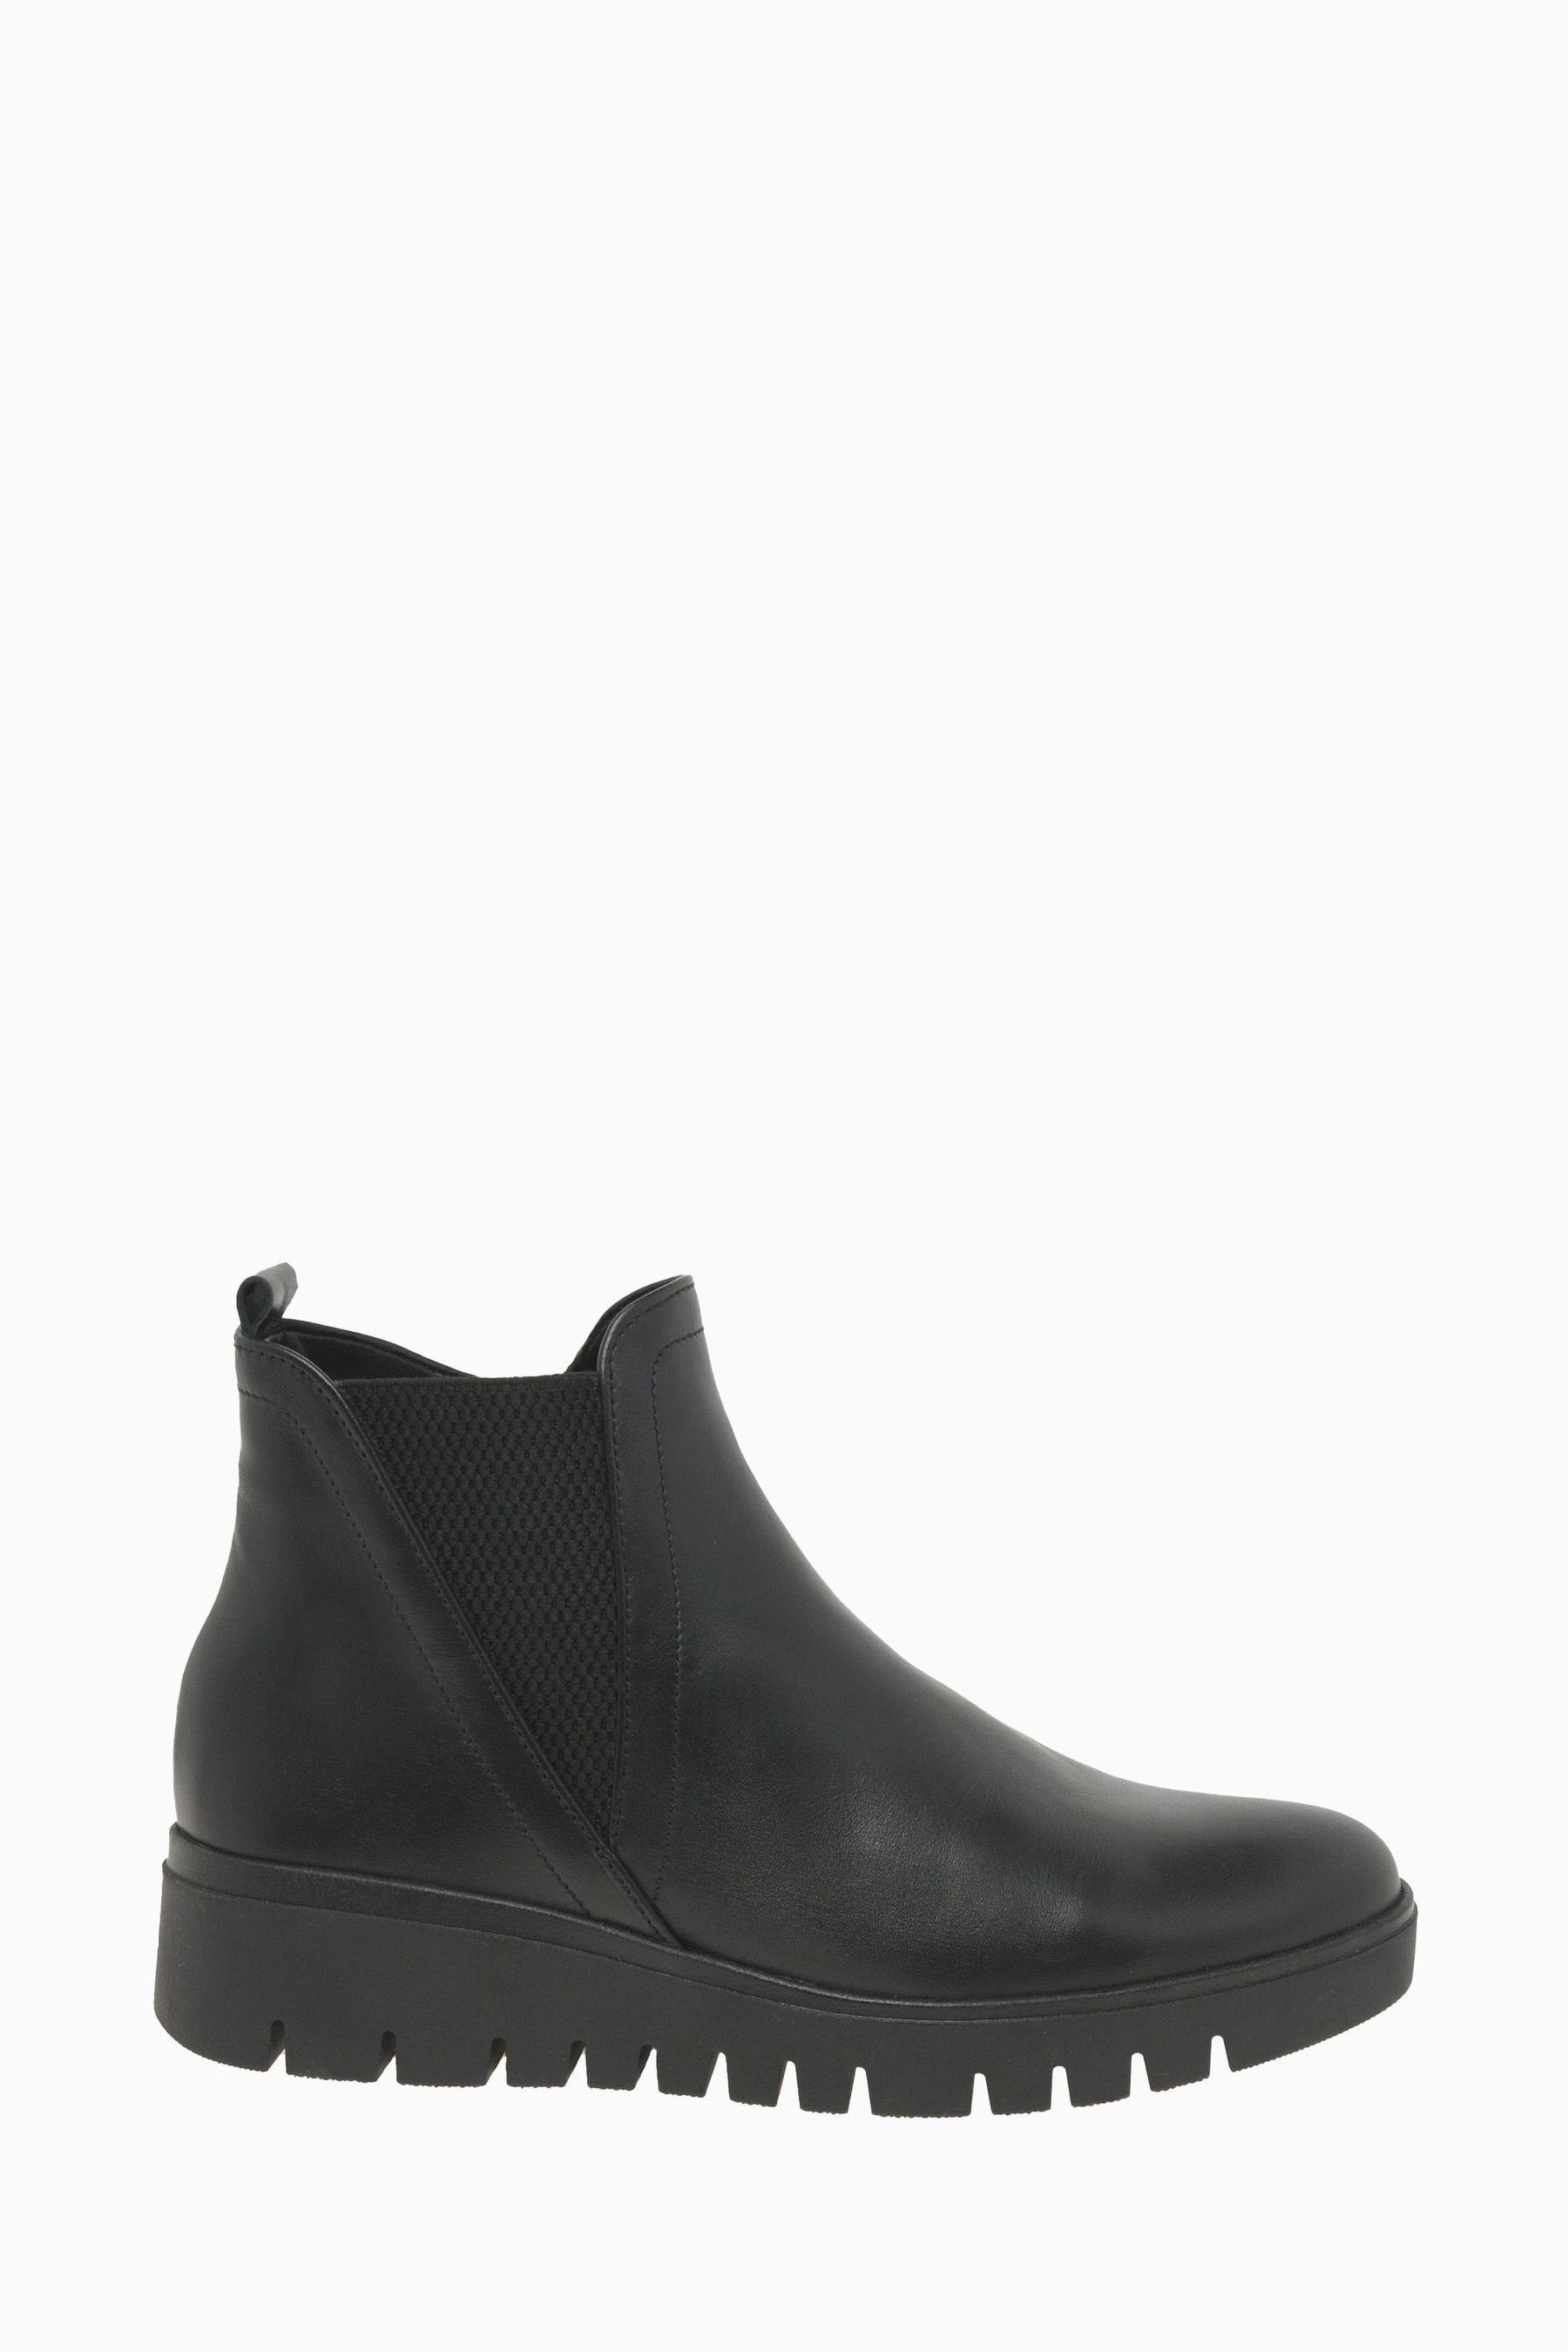 Buy Gabor Dublin Black Leather Ankle Boots from the Next UK online shop